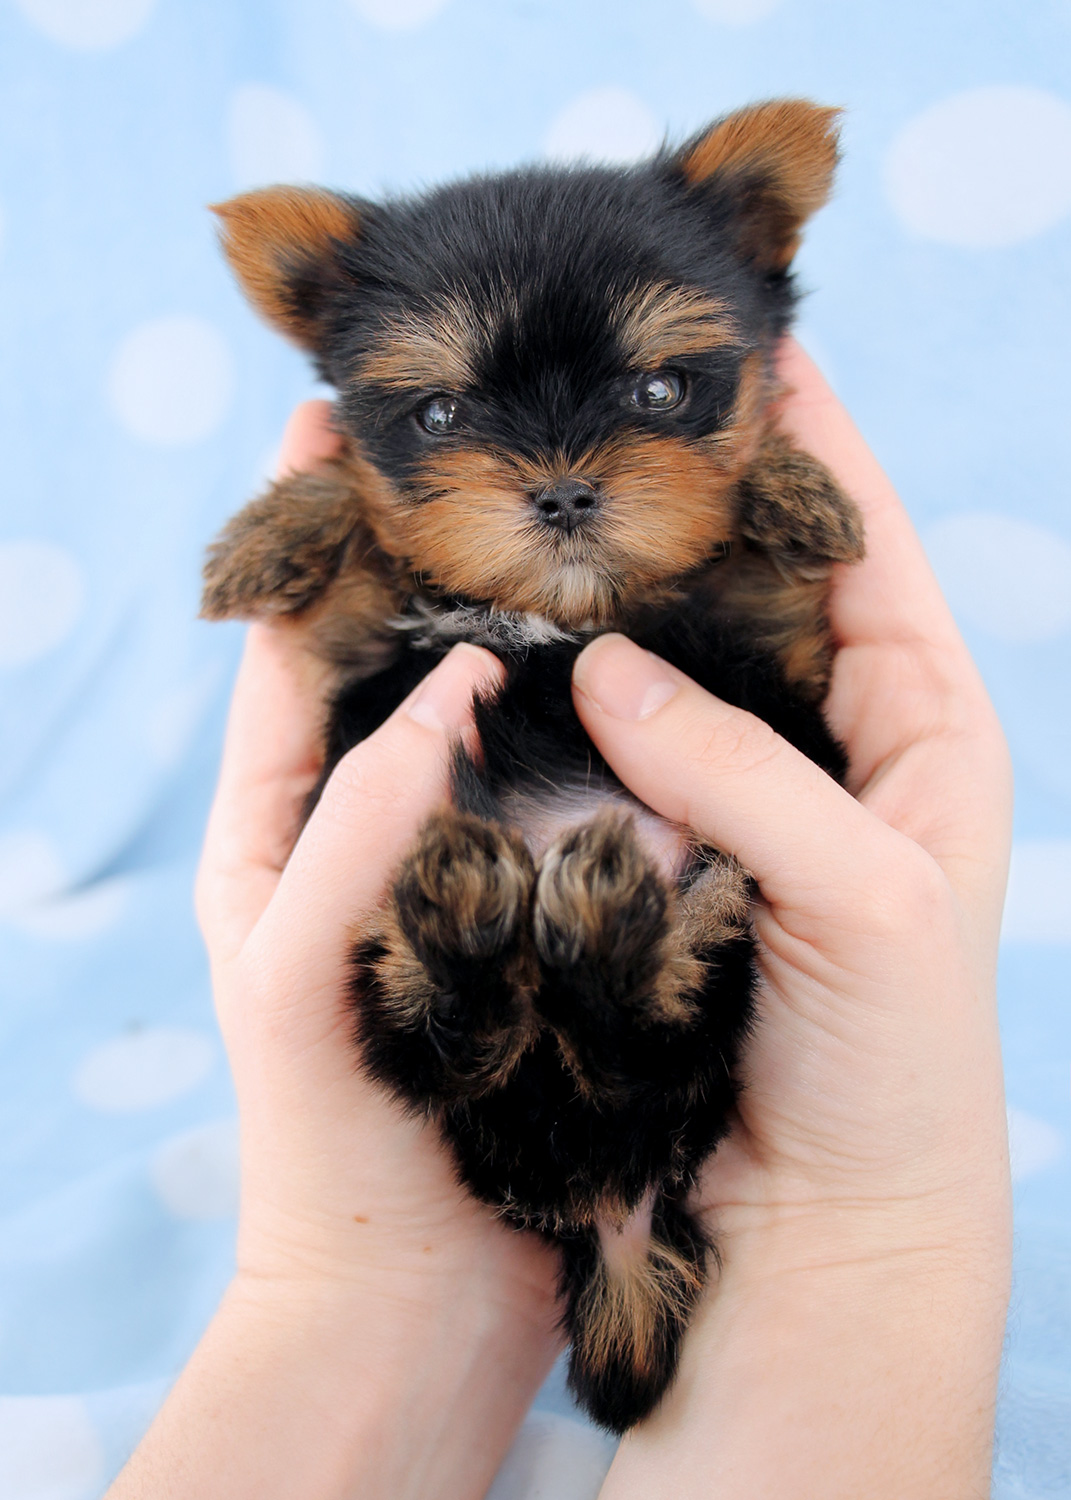 Cute Teacup Yorkshire "Yorkie" Terrier Puppies for Sale